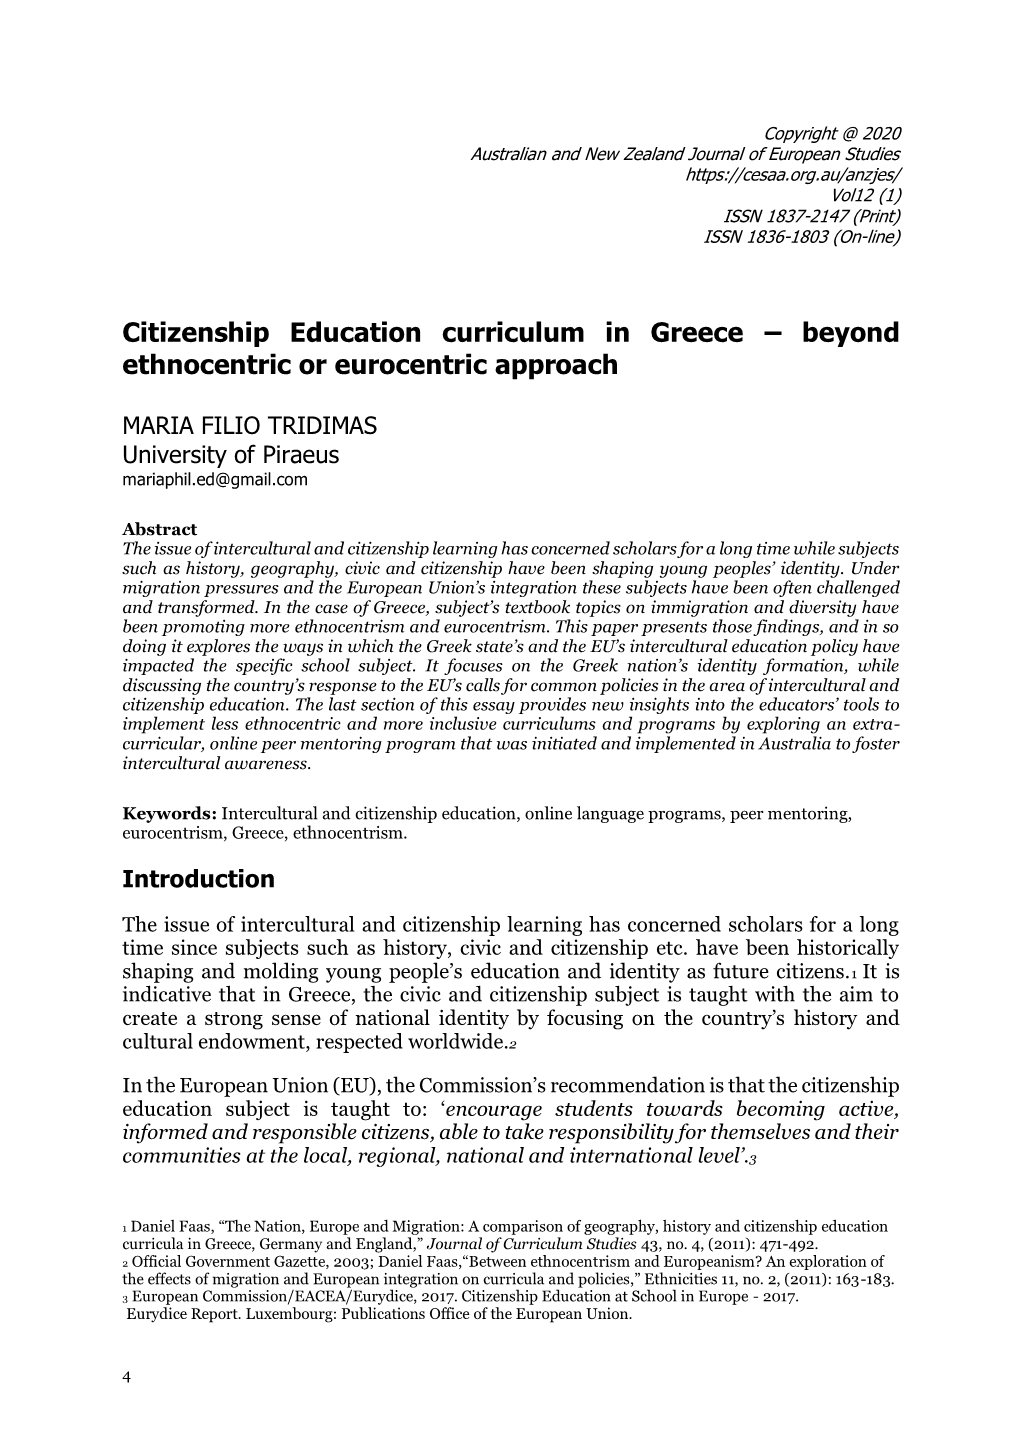 Citizenship Education Curriculum in Greece Beyond Ethnocentric Or